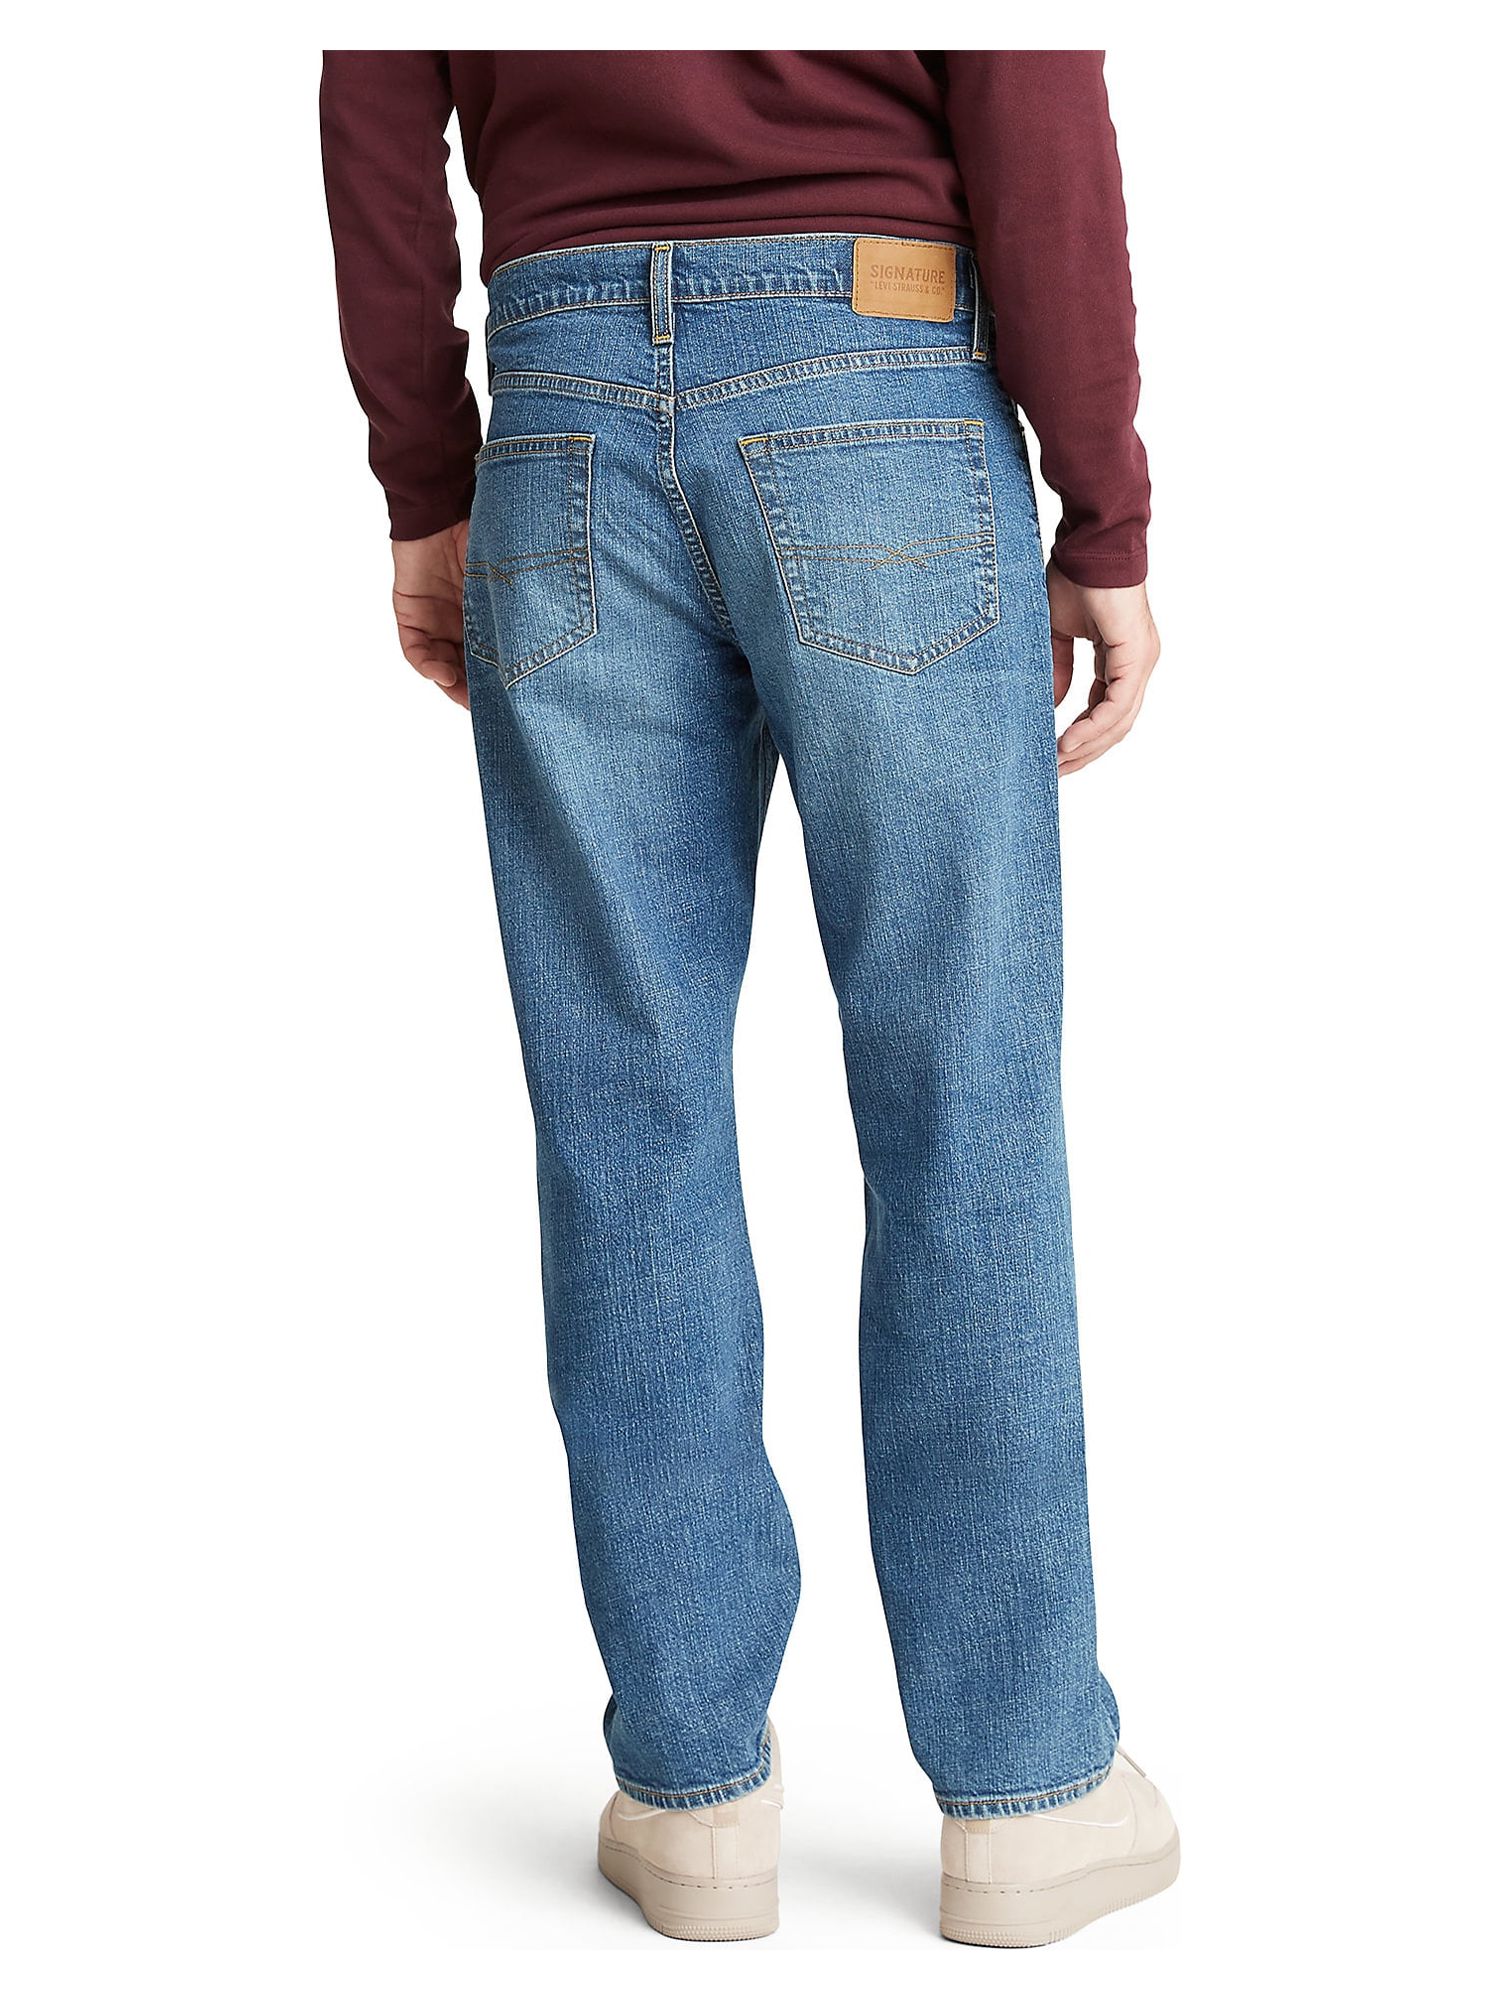 Signature by Levi Strauss & Co. Men's Athletic Fit Jeans - image 2 of 4